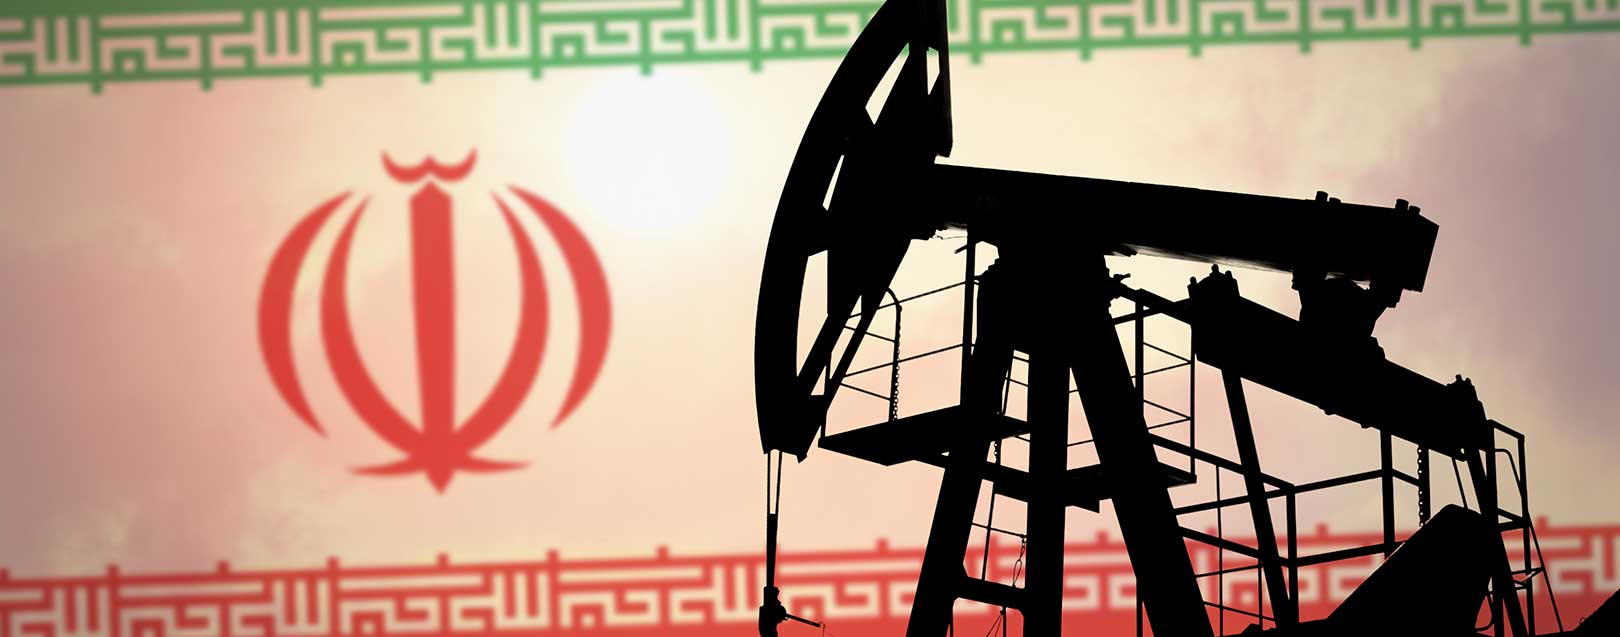 Iran expects sharp rise in gas production, exports